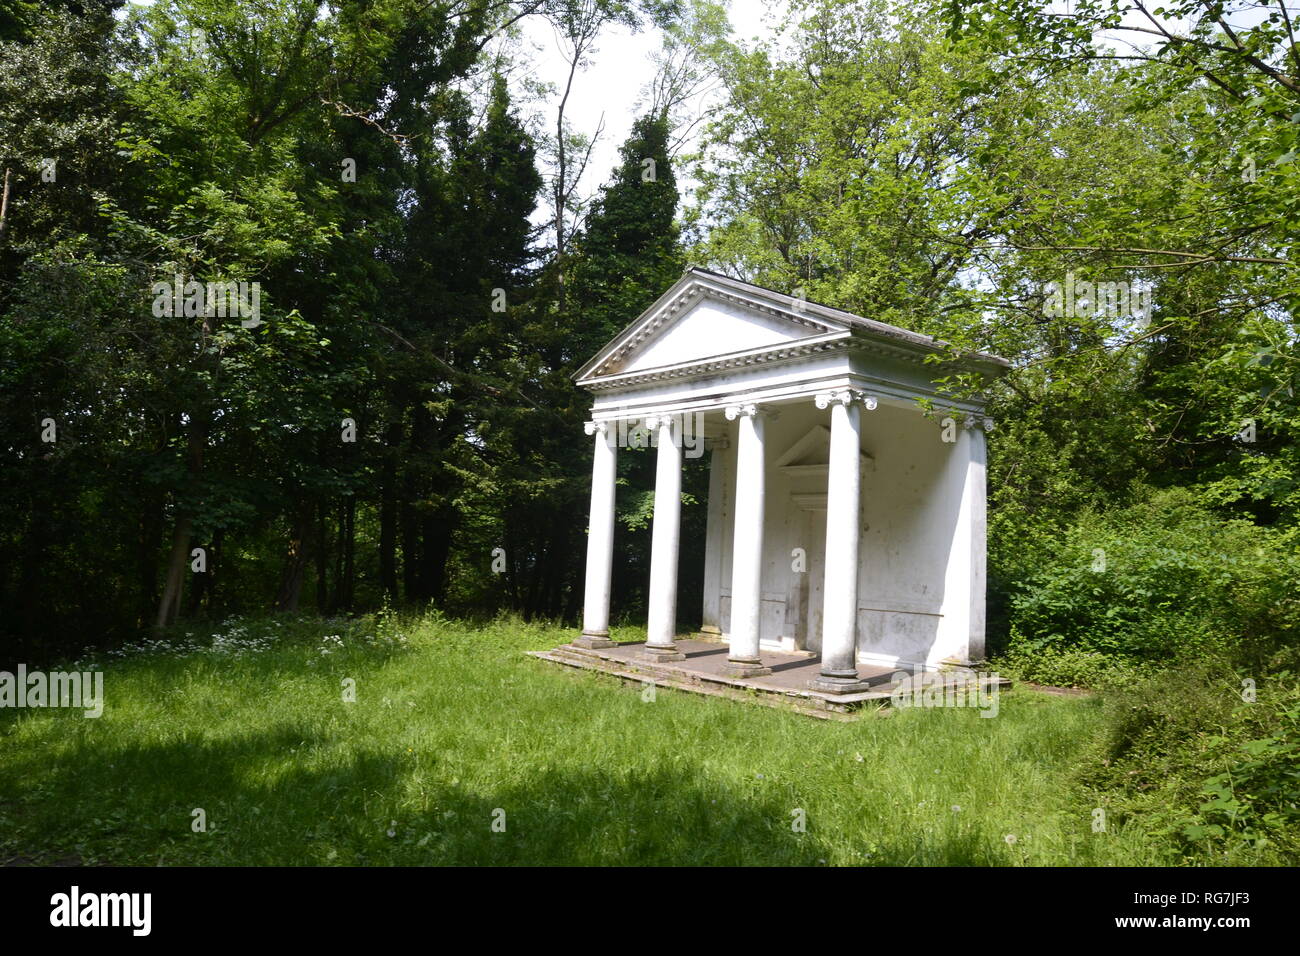 Temple or folly at Tring Park, Tring, Hertfordshire, UK Stock Photo